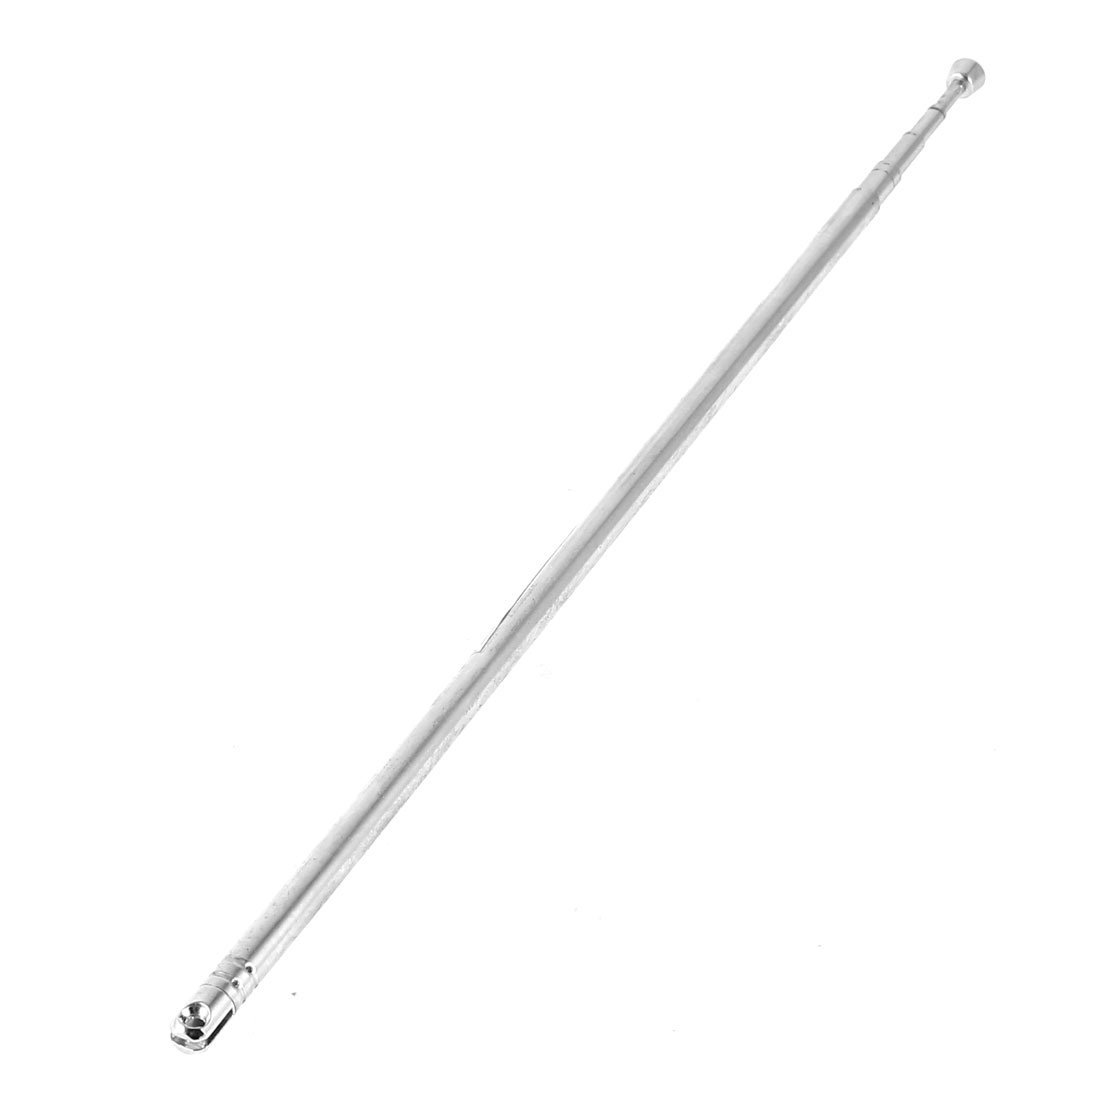 FM radio TV Silver 100 centimeter 5 section exchangeable antenna replacement